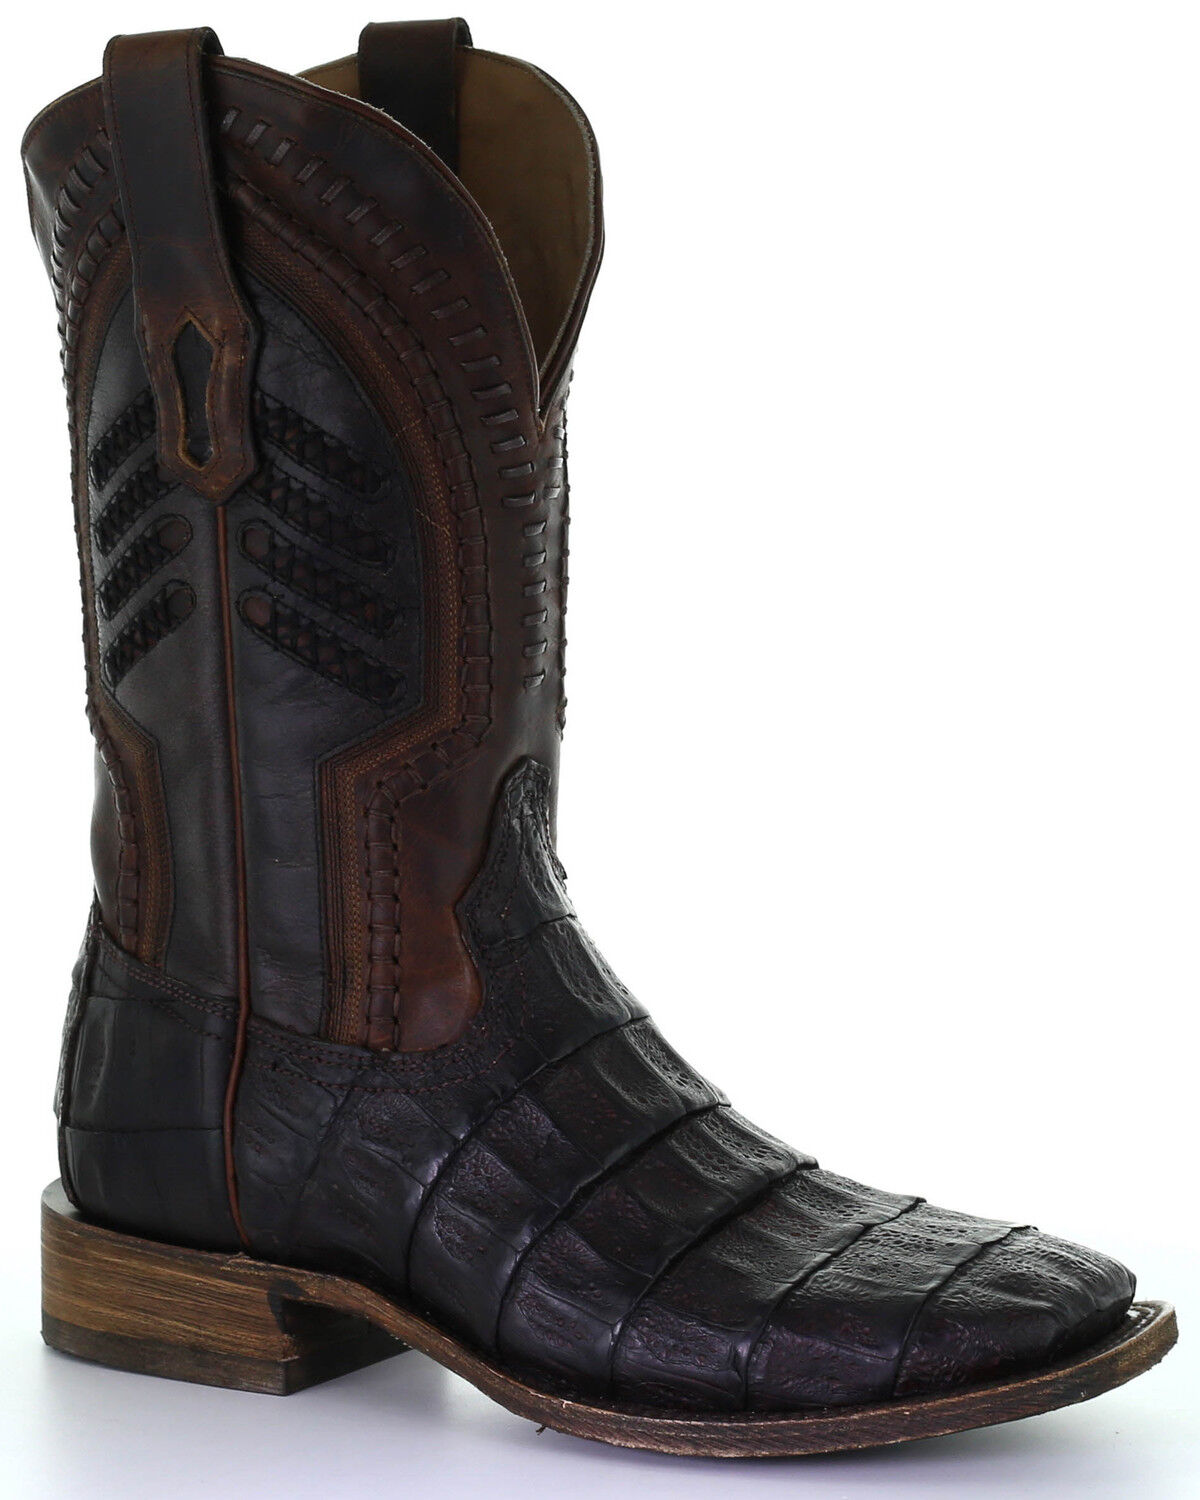 CORRAL Men's Brown Overlay Square Toe Cowboy Boots R1432 